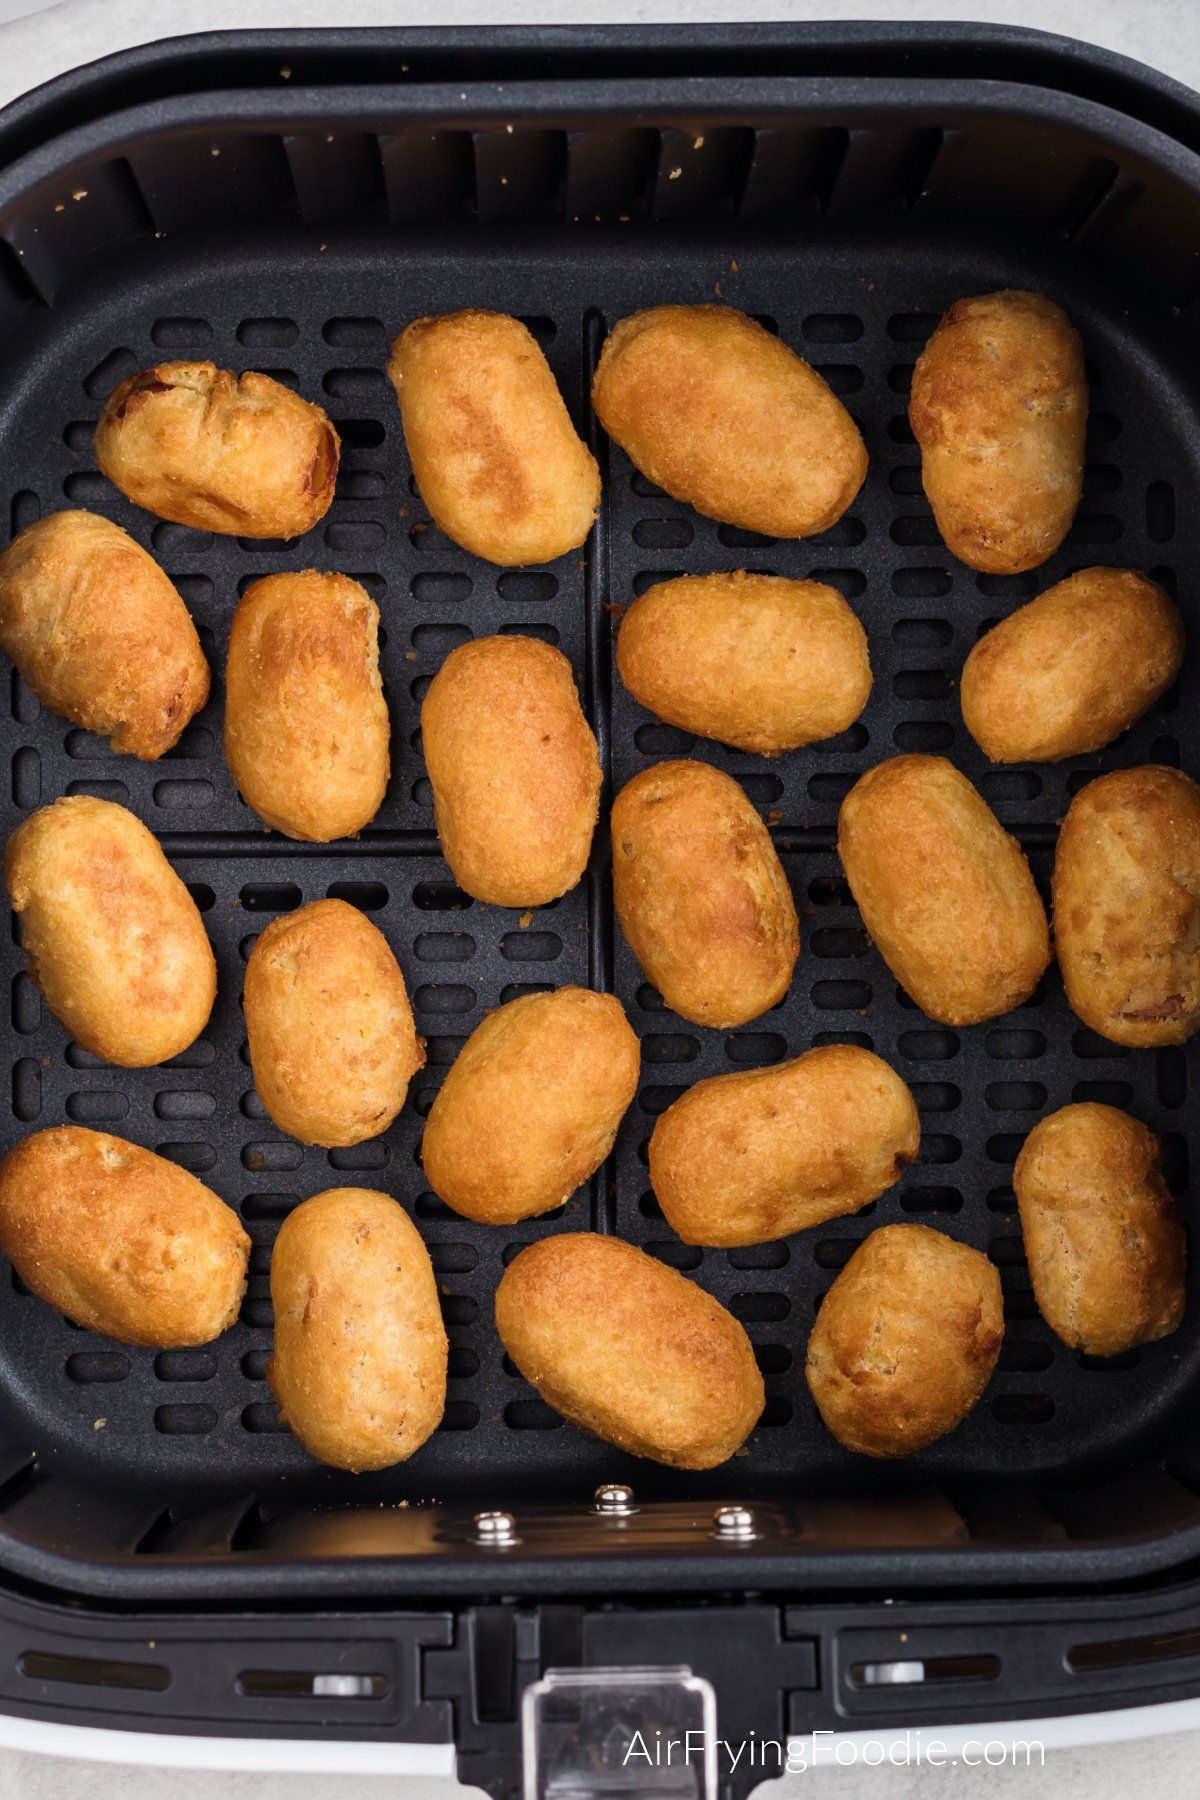 Frozen mini corn dogs in the basket of the air fryer, fully cooked.